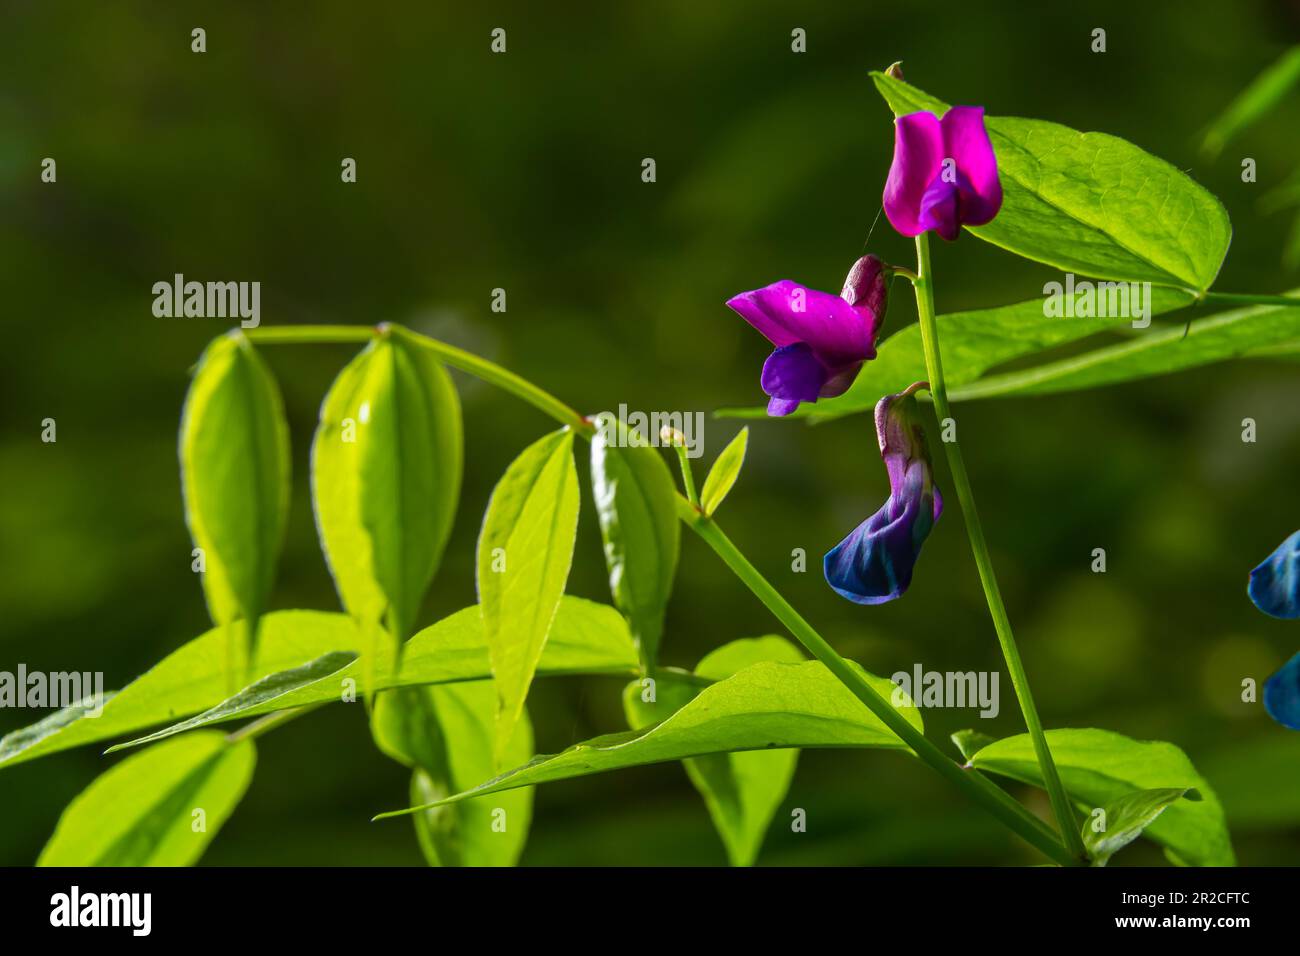 Lathyrus vernus in bloom, early spring vechling flower with blosoom and green leaves growing in forest, macro. Stock Photo